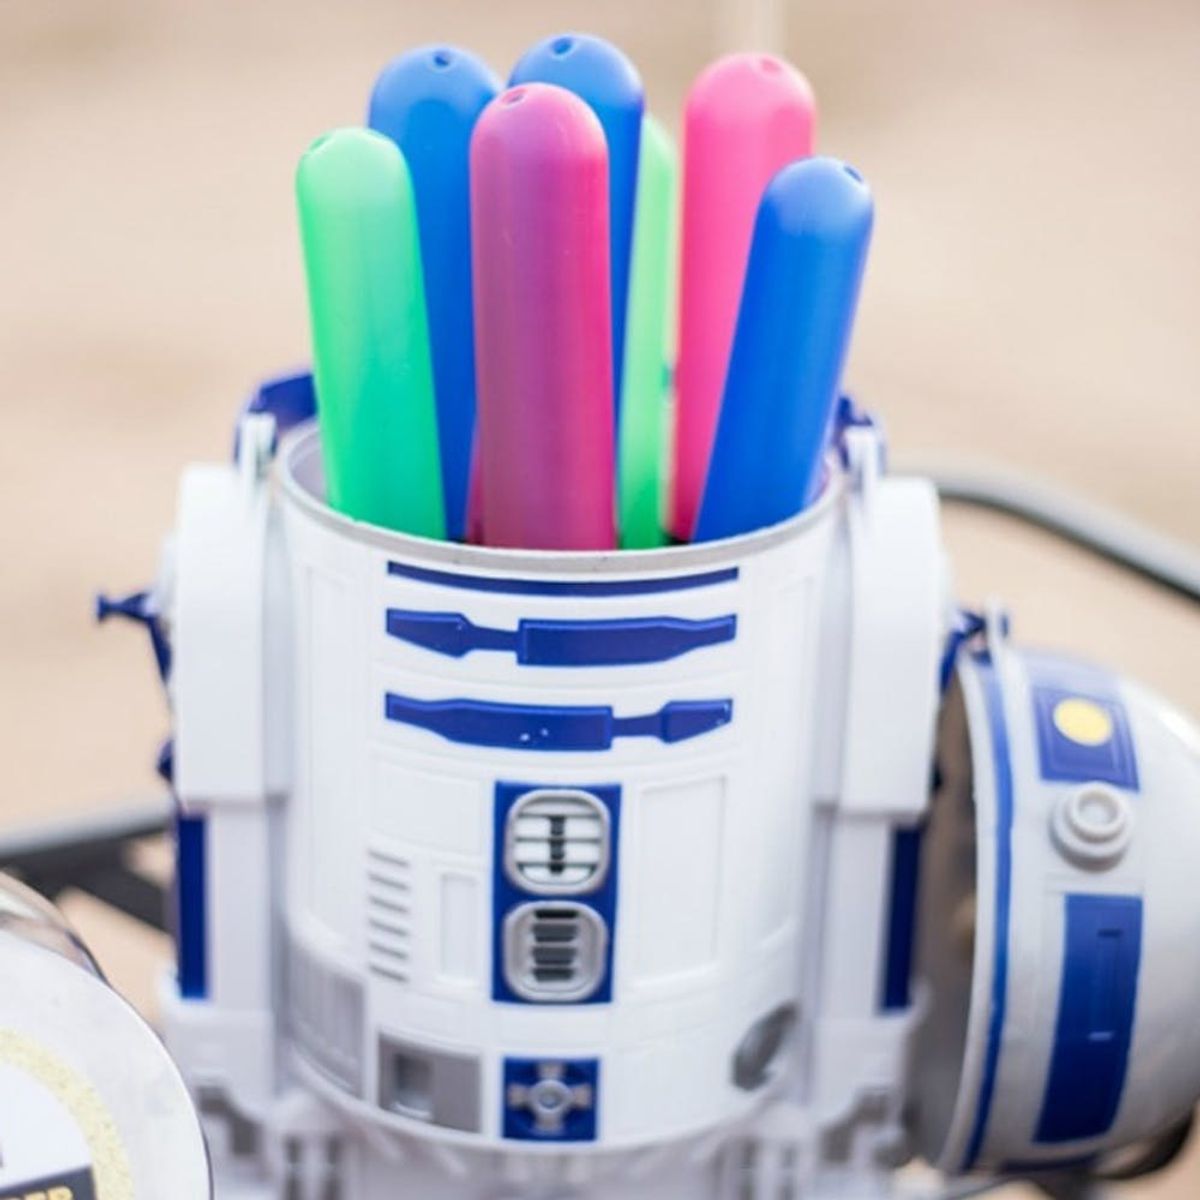 11 Ways to Celebrate the Force on Star Wars Day